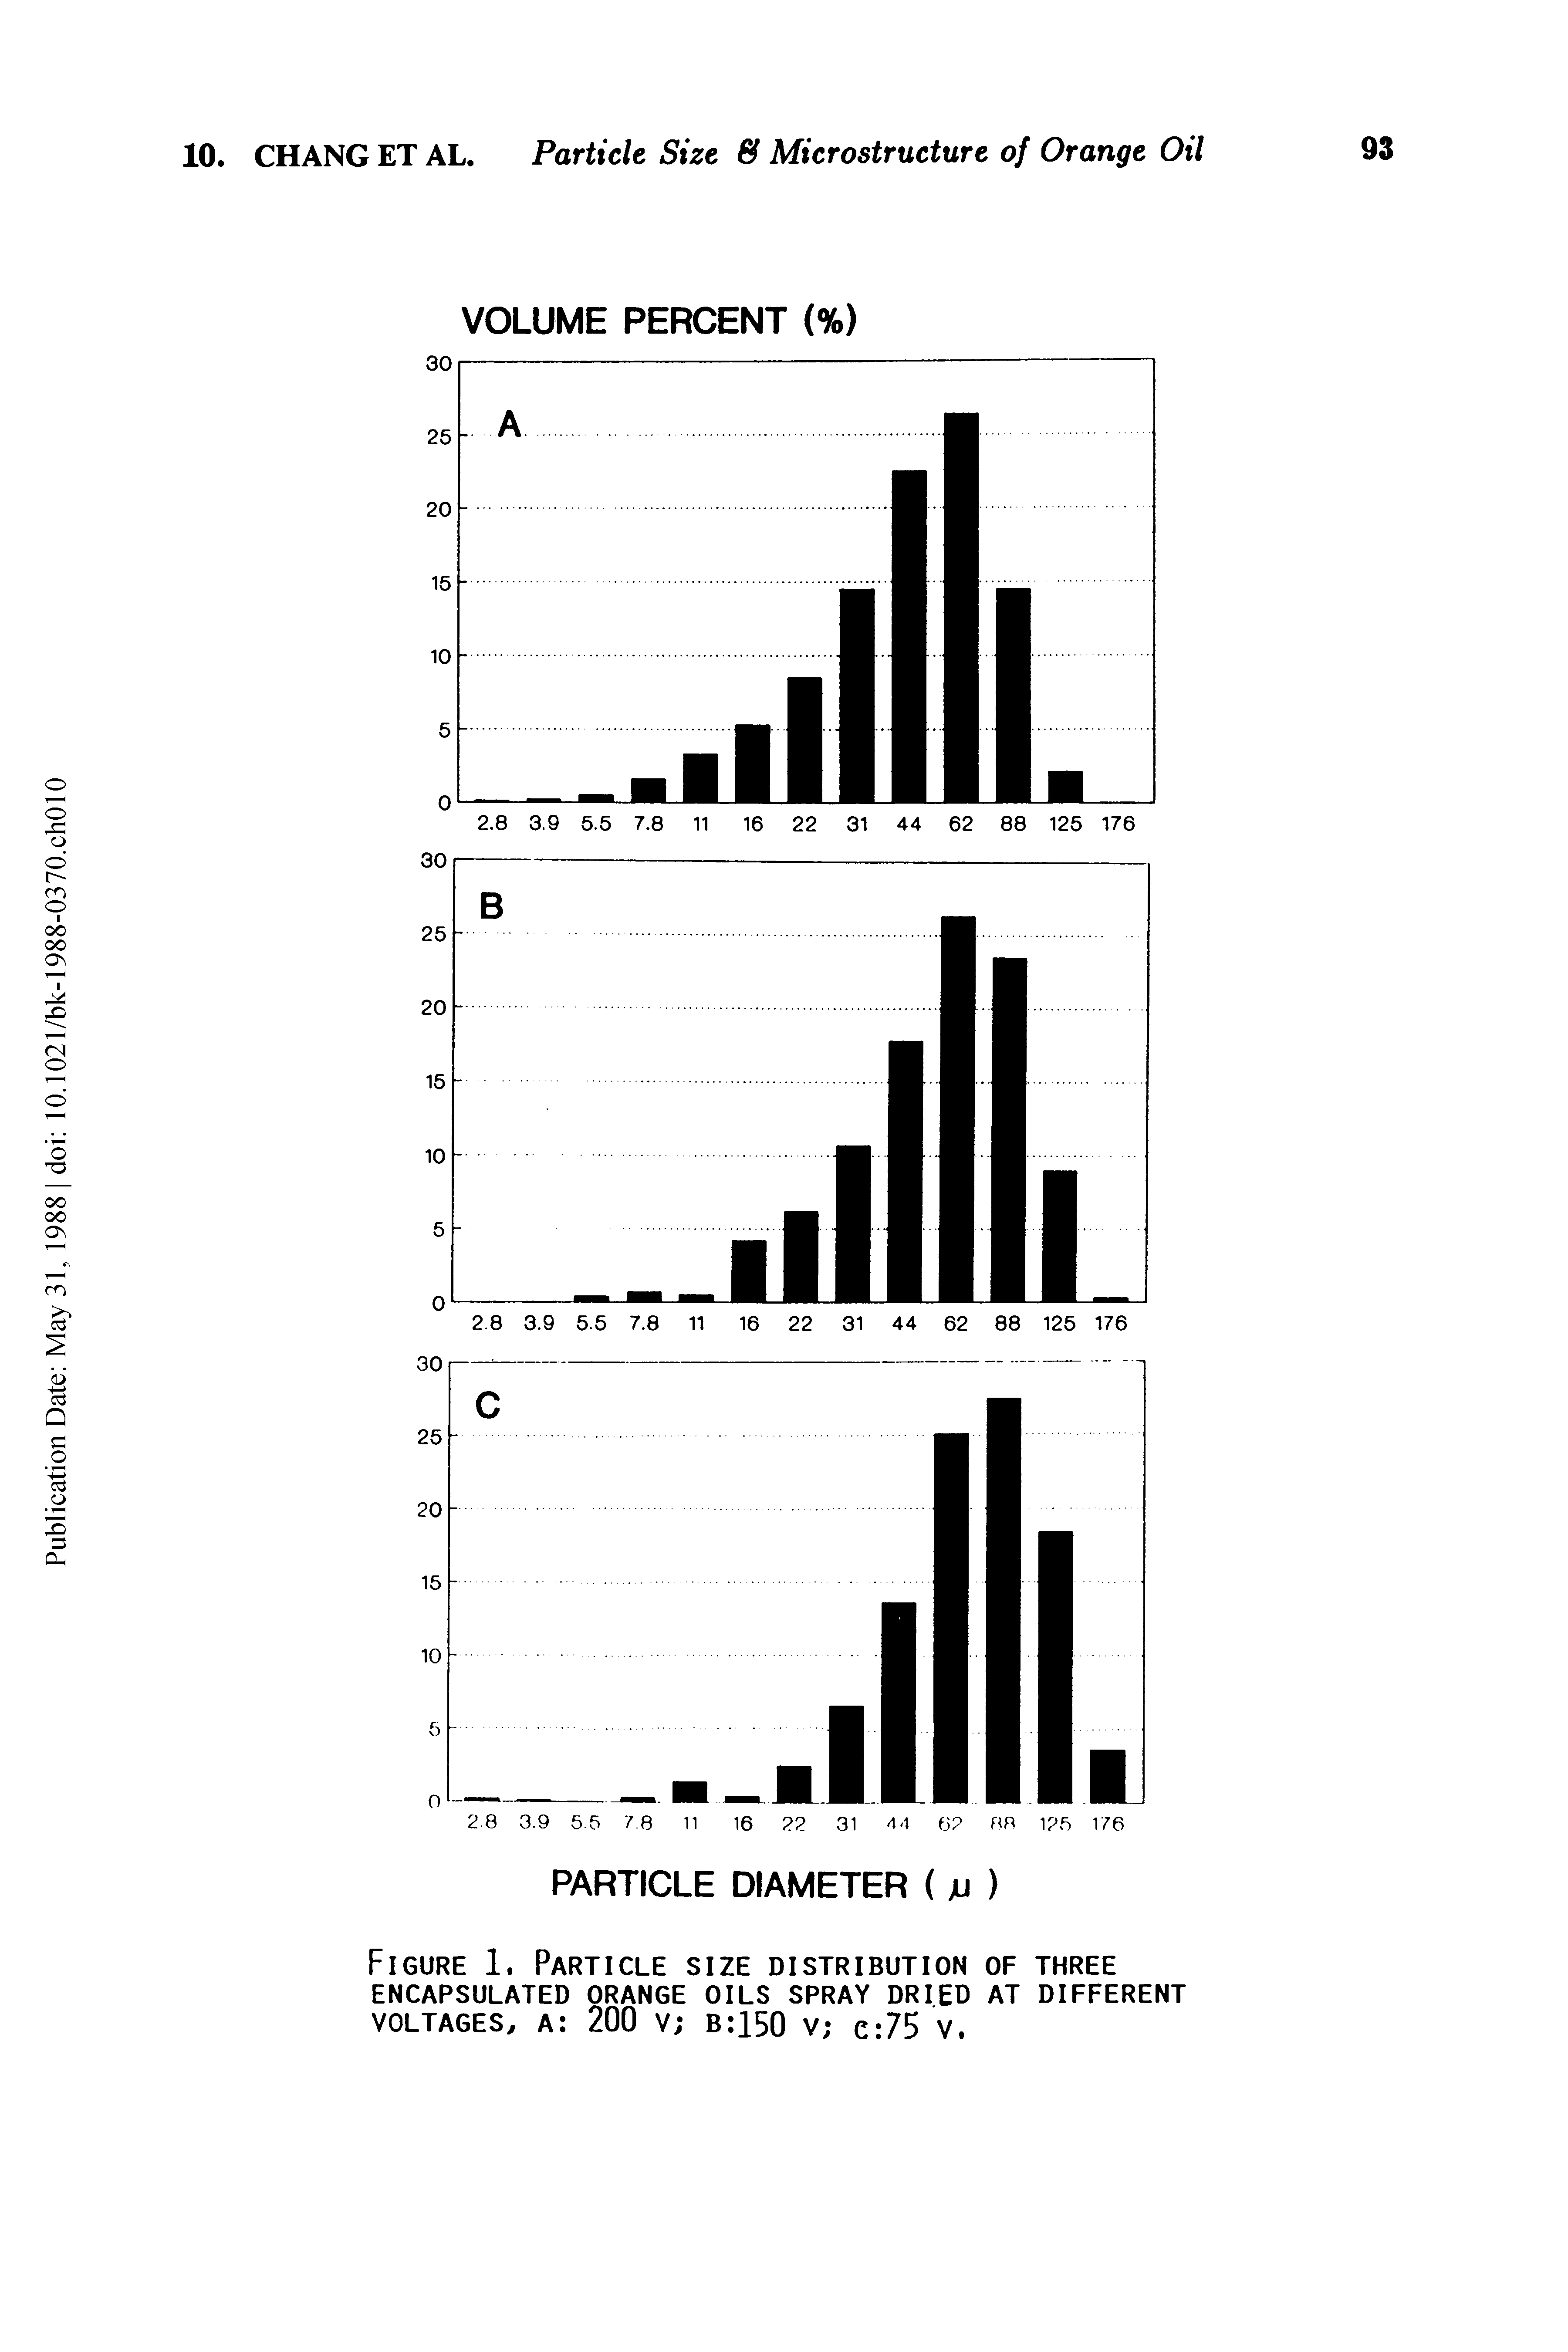 Figure 1. Particle size distribution of three ENCAPSULATED ORANGE OILS SPRAY DRIED AT DIFFERENT VOLTAGES, a 200 v b 150 v C 75 V.